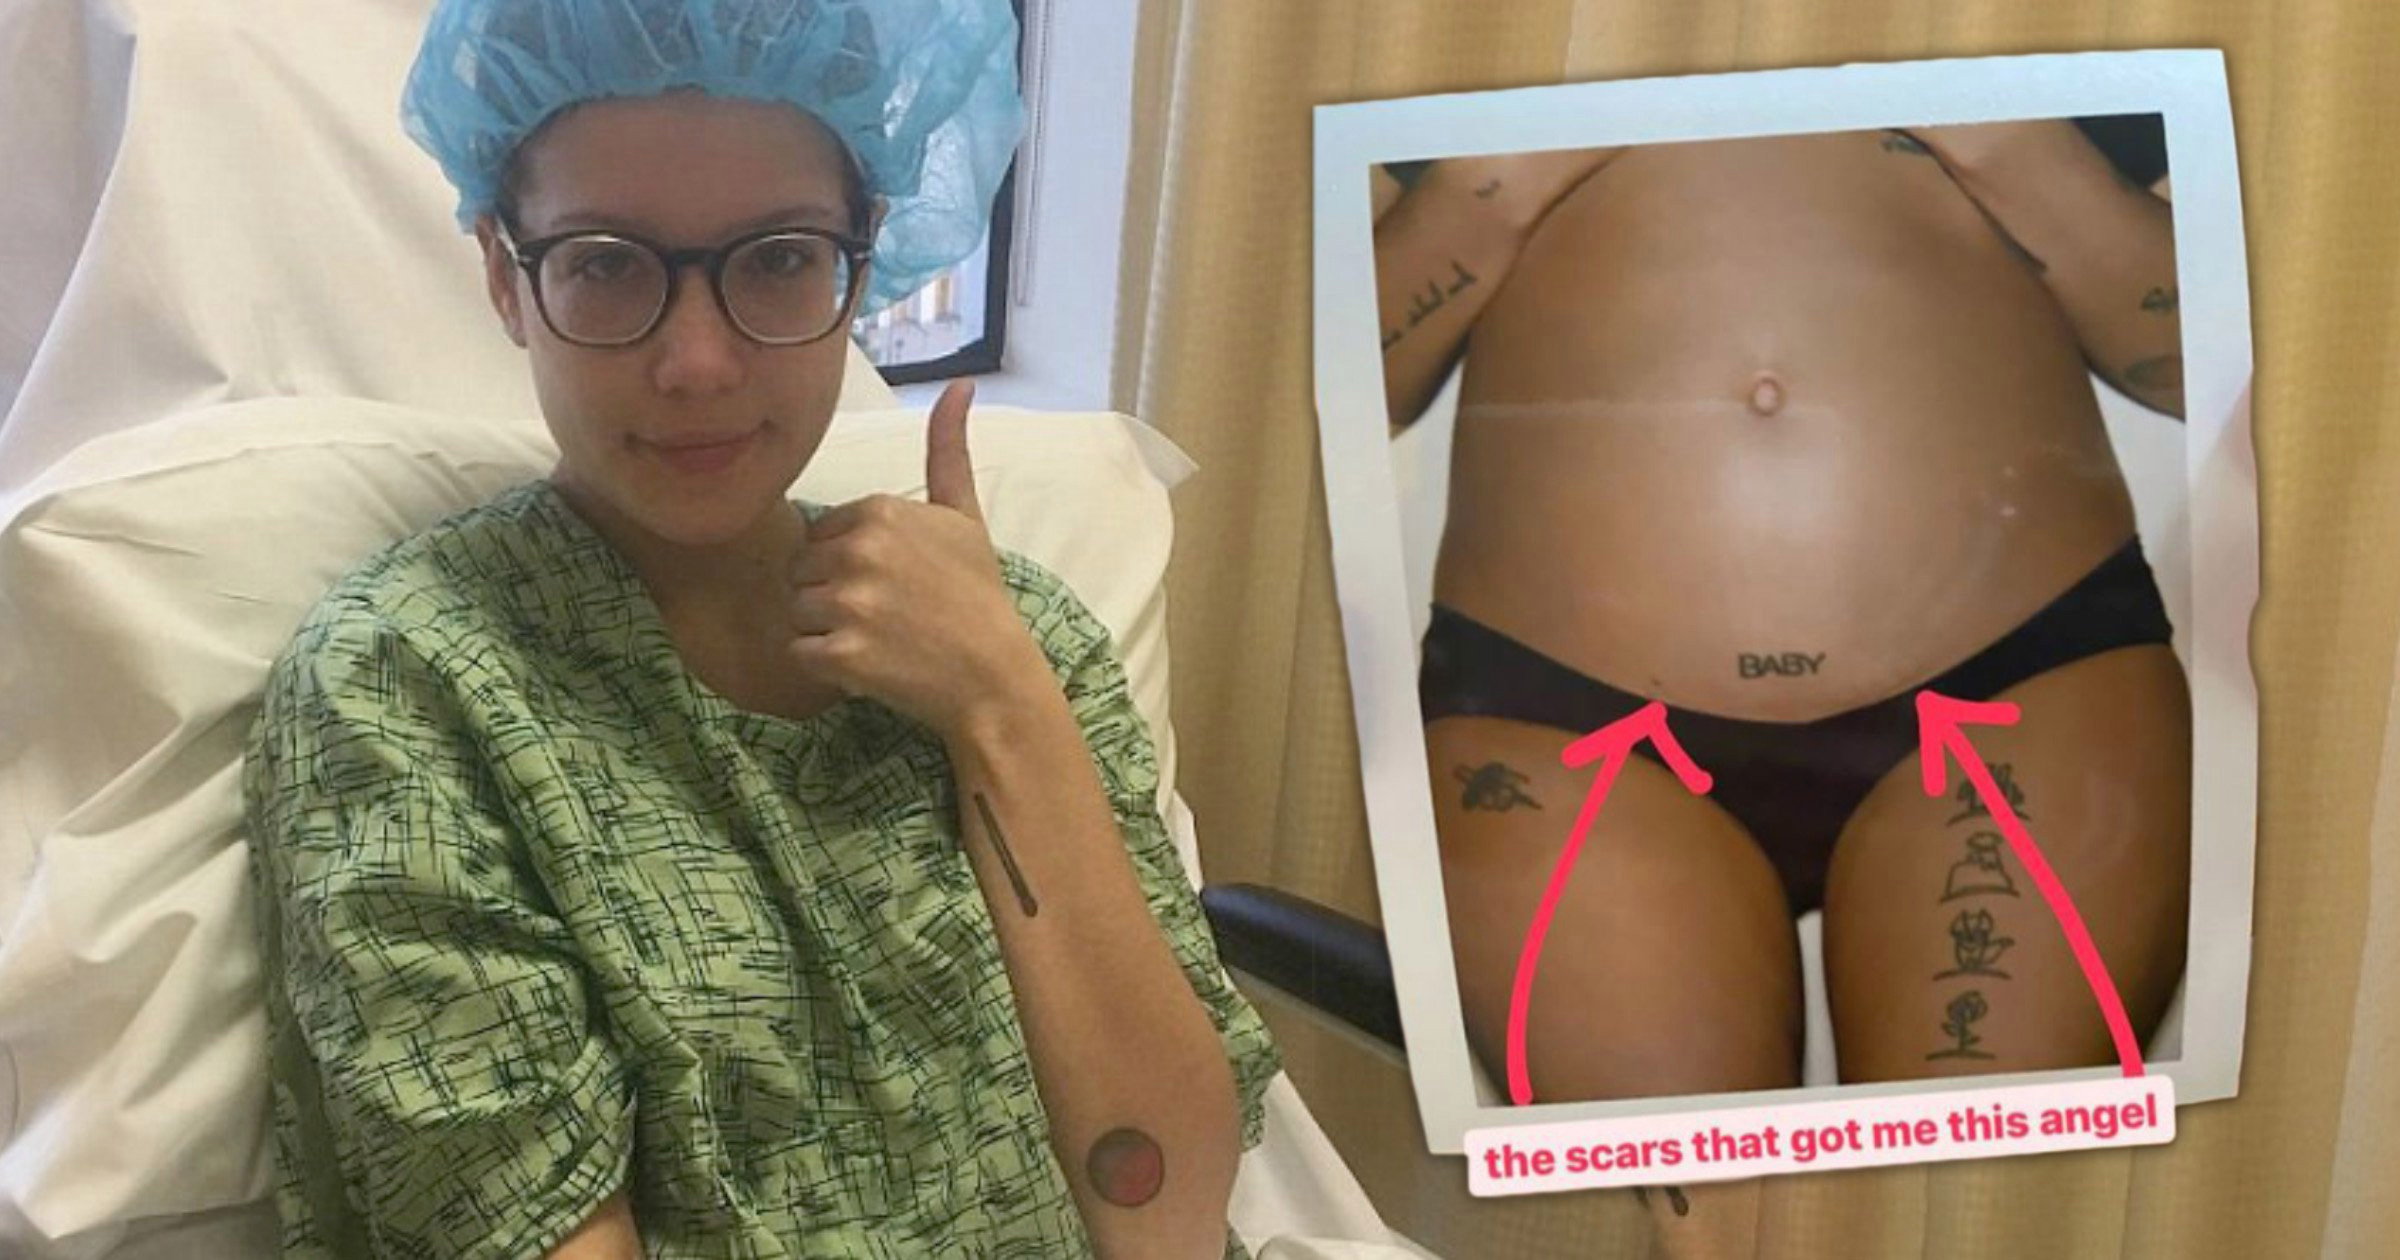 Pregnant Halsey shows off the ‘scars that got me this angel’ after endometriosis struggle